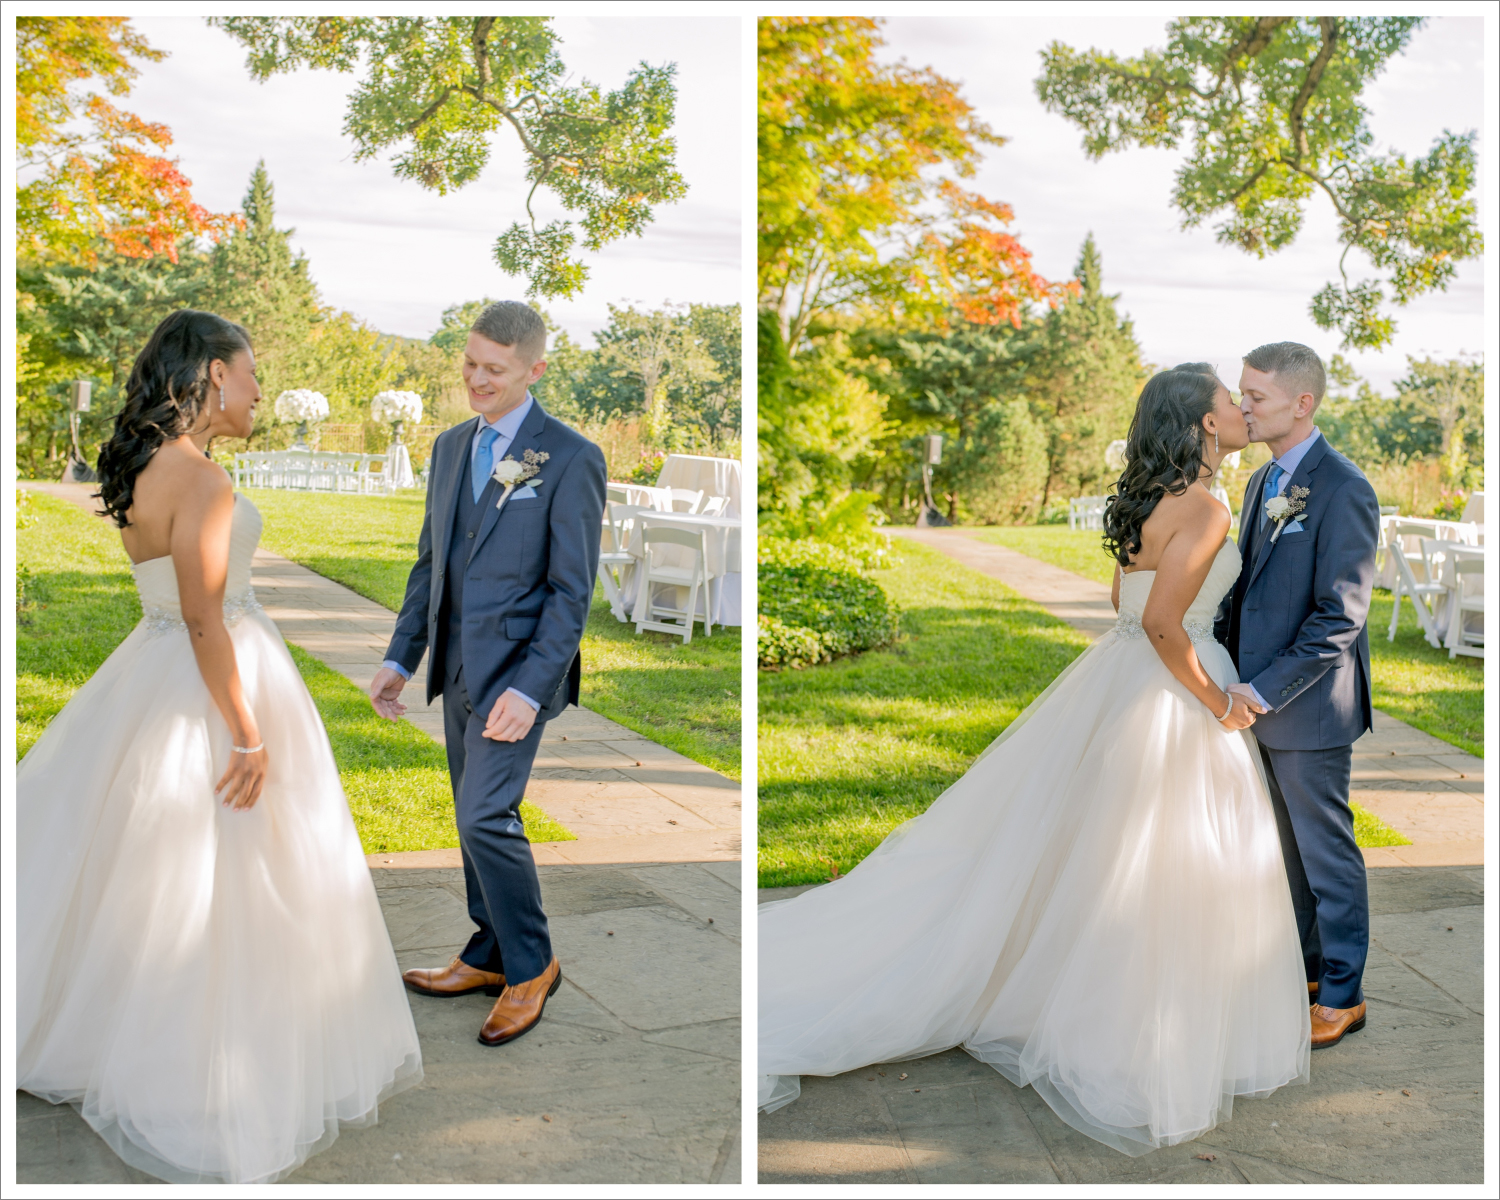 Stacey & Brian - Dreamy Wedding at Castle Hotel & Spa New York